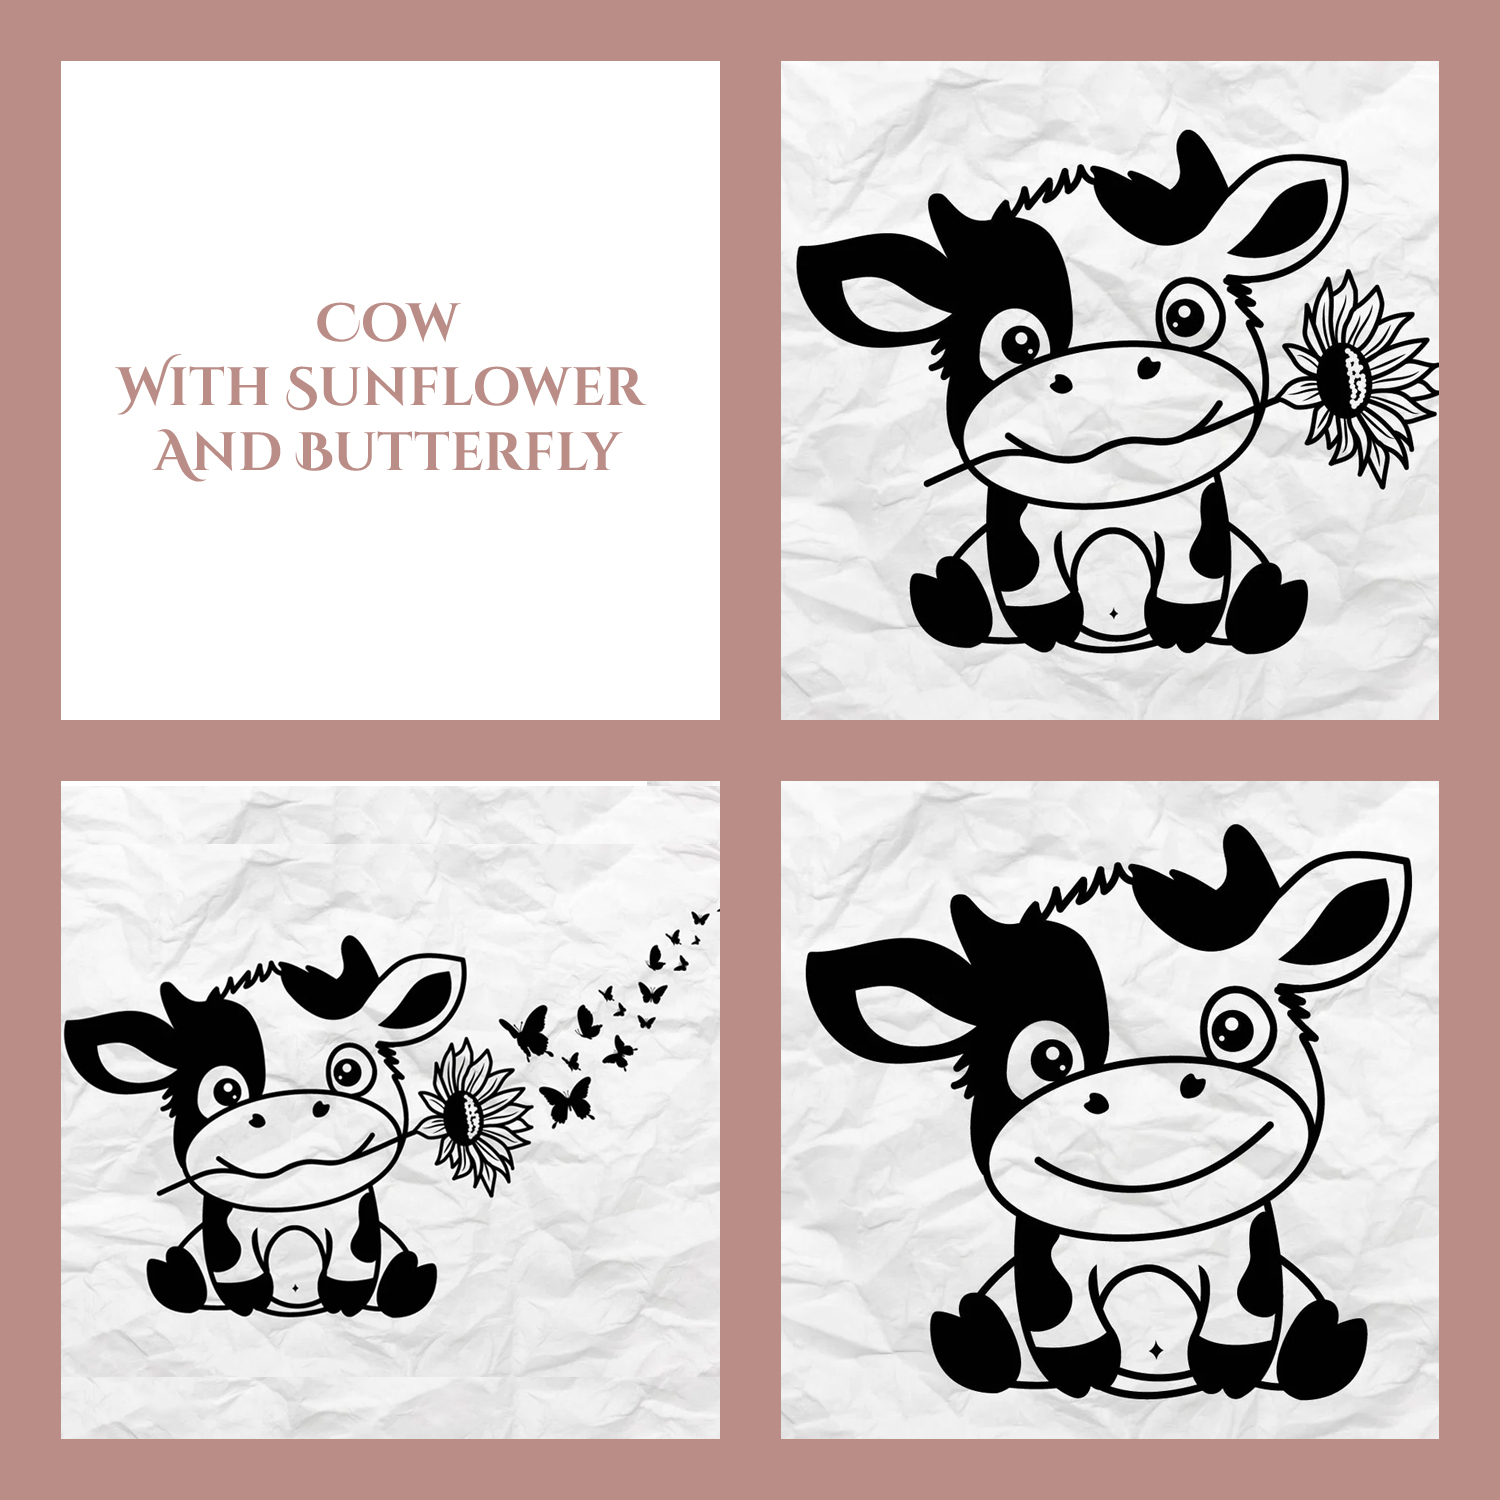 Cow with sunflower and butterfly on a piece of paper.